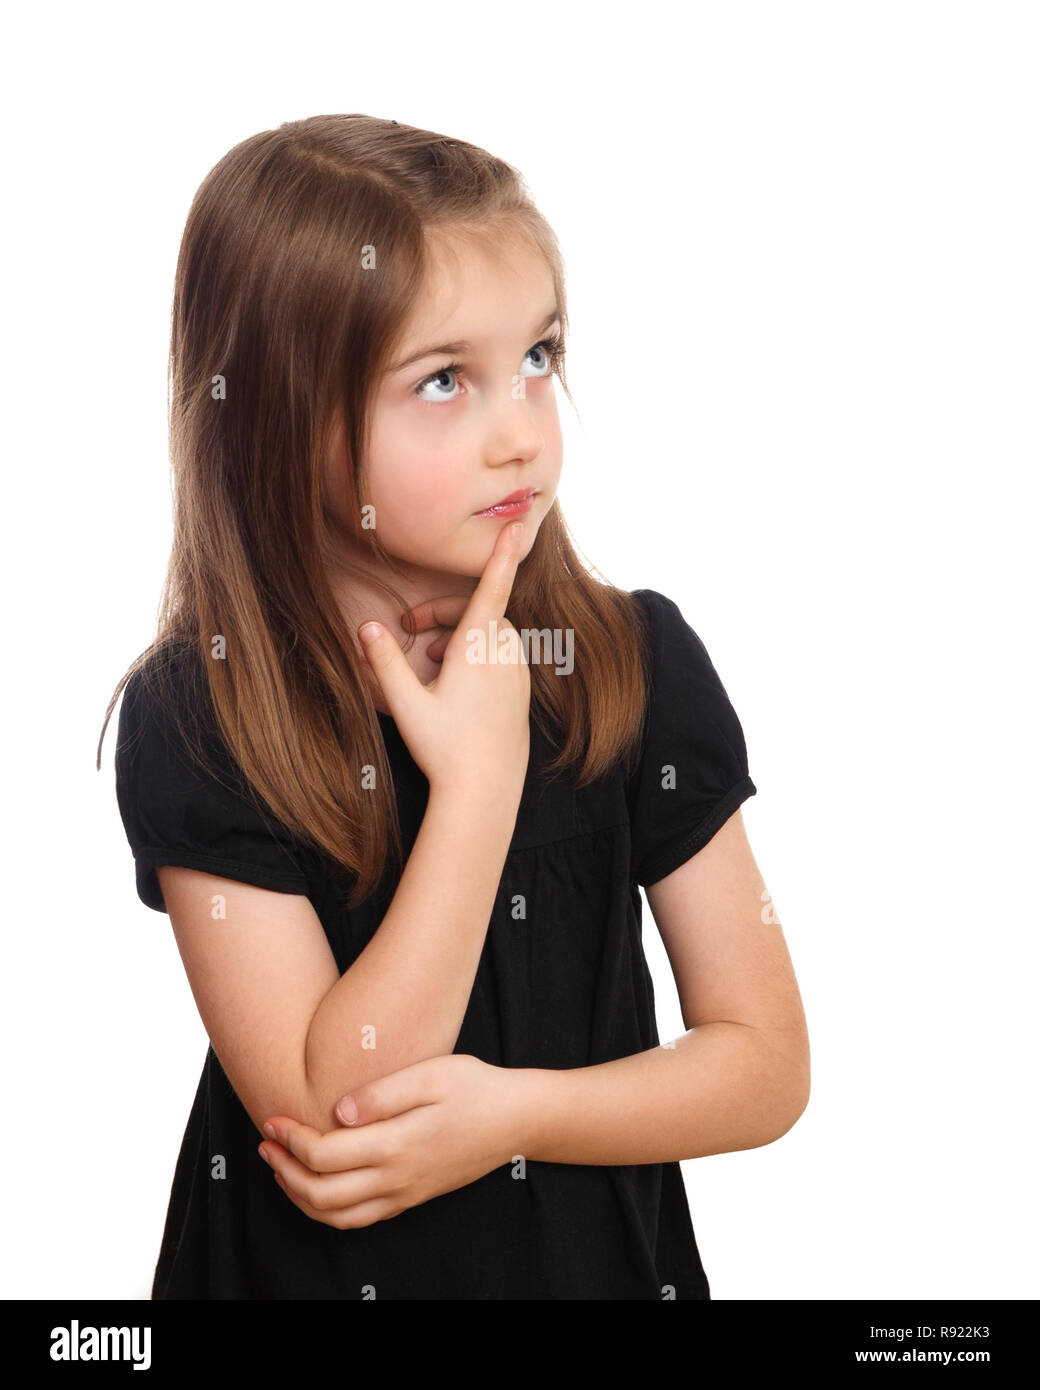 Cute Young Girl With Finger On Mouth Thinking Pondering Or D